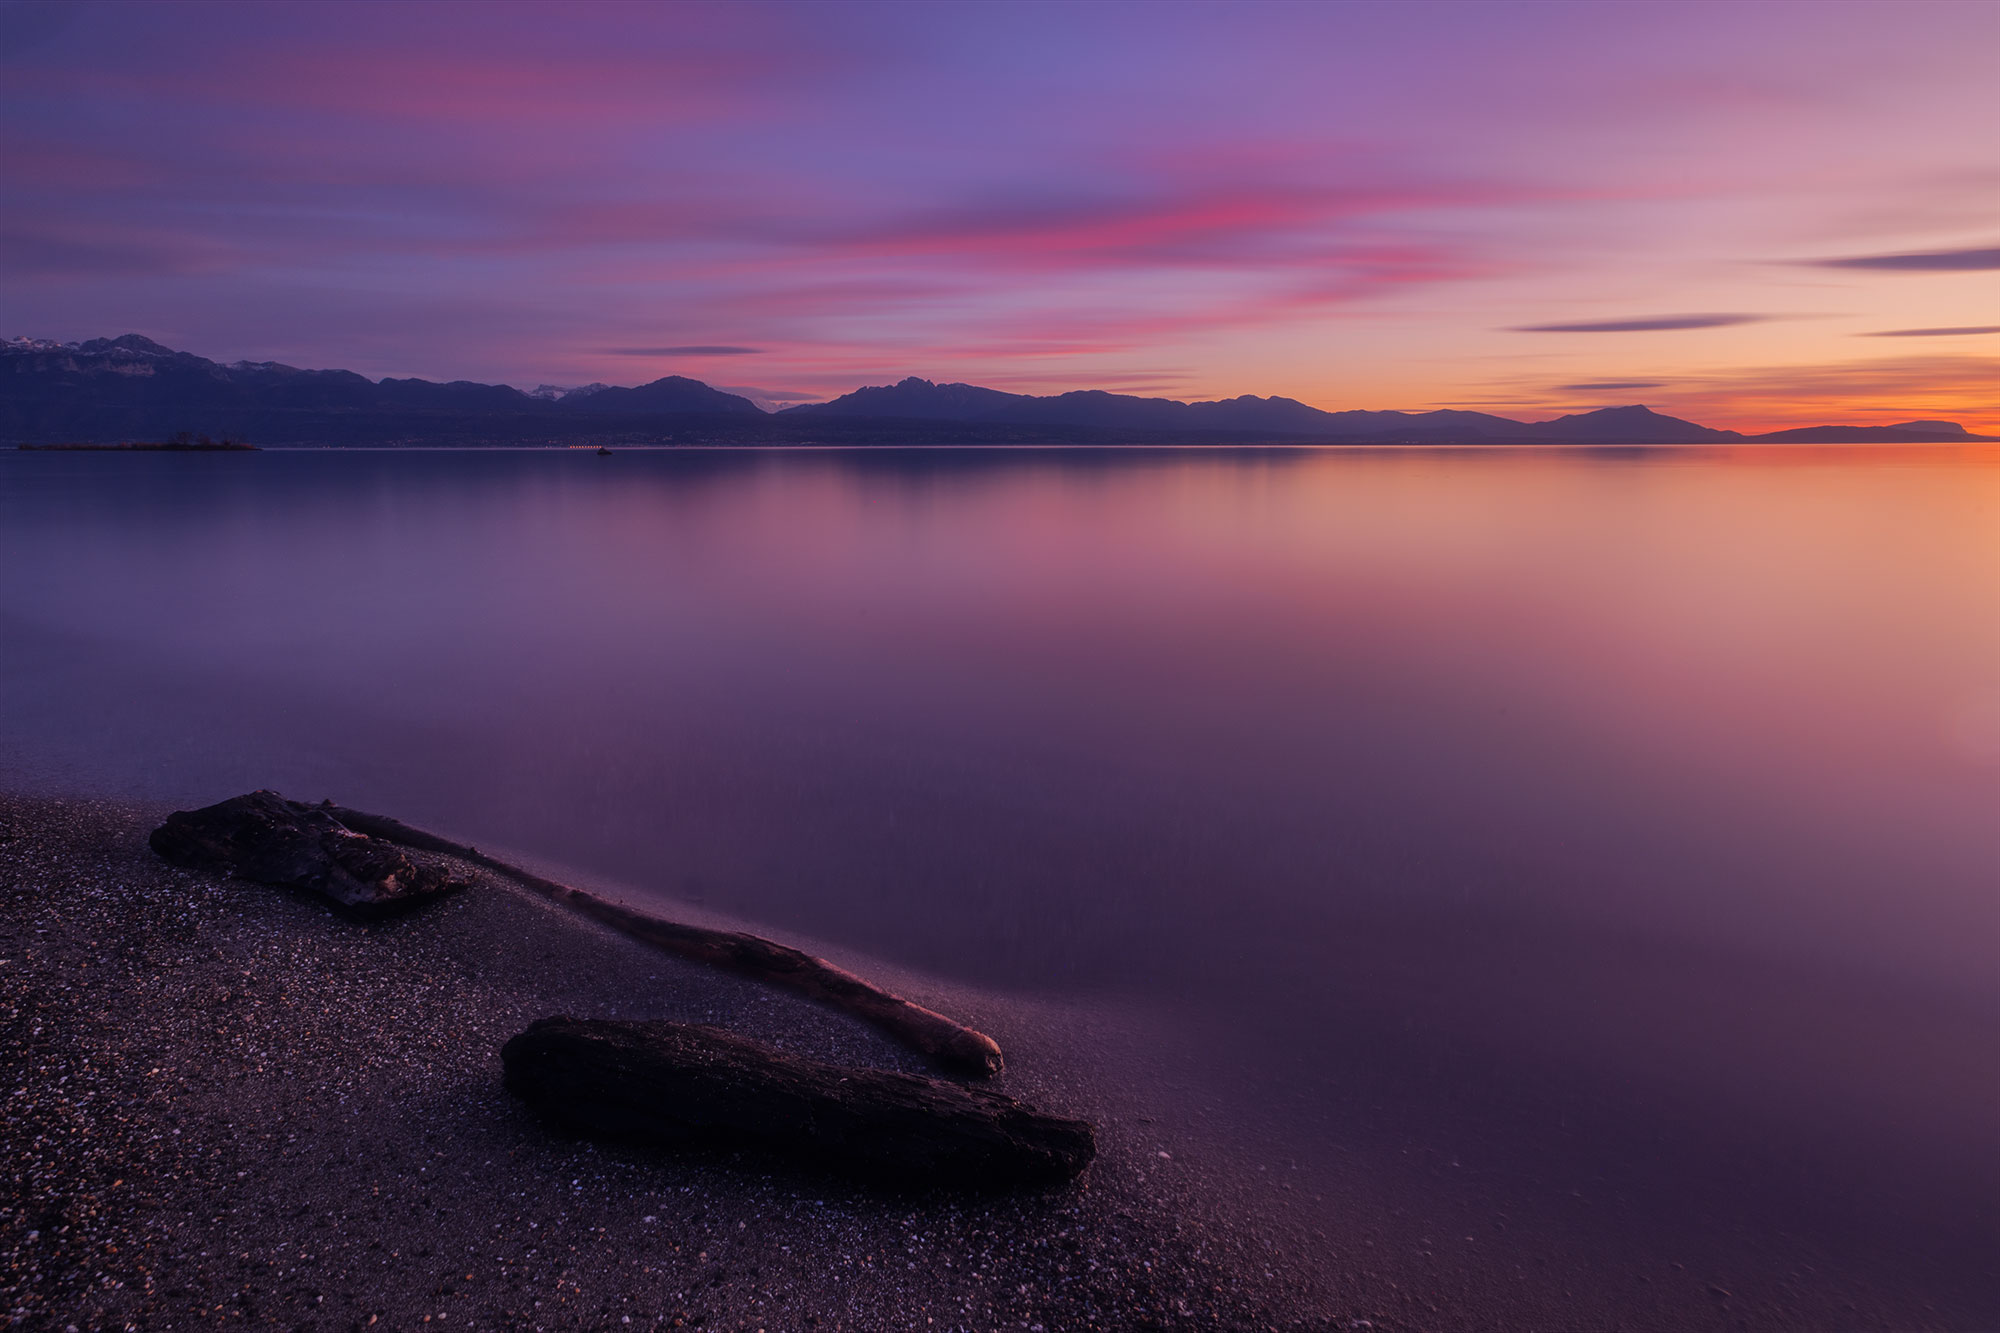 Embark on a visual odyssey through the lens of renowned Swiss photographer Jennifer Esseiva, capturing the breathtaking beauty of a pink sunset over Lake Geneva from Préverenges Beach. With a mastery of long exposures, Jennifer crafts a mesmerizing scene where the tranquil waters reflect the hues of the twilight sky. Immerse yourself in the artistry of Swiss landscape photography, as every frame transports you to the serene shores of Lake Geneva, Switzerland.